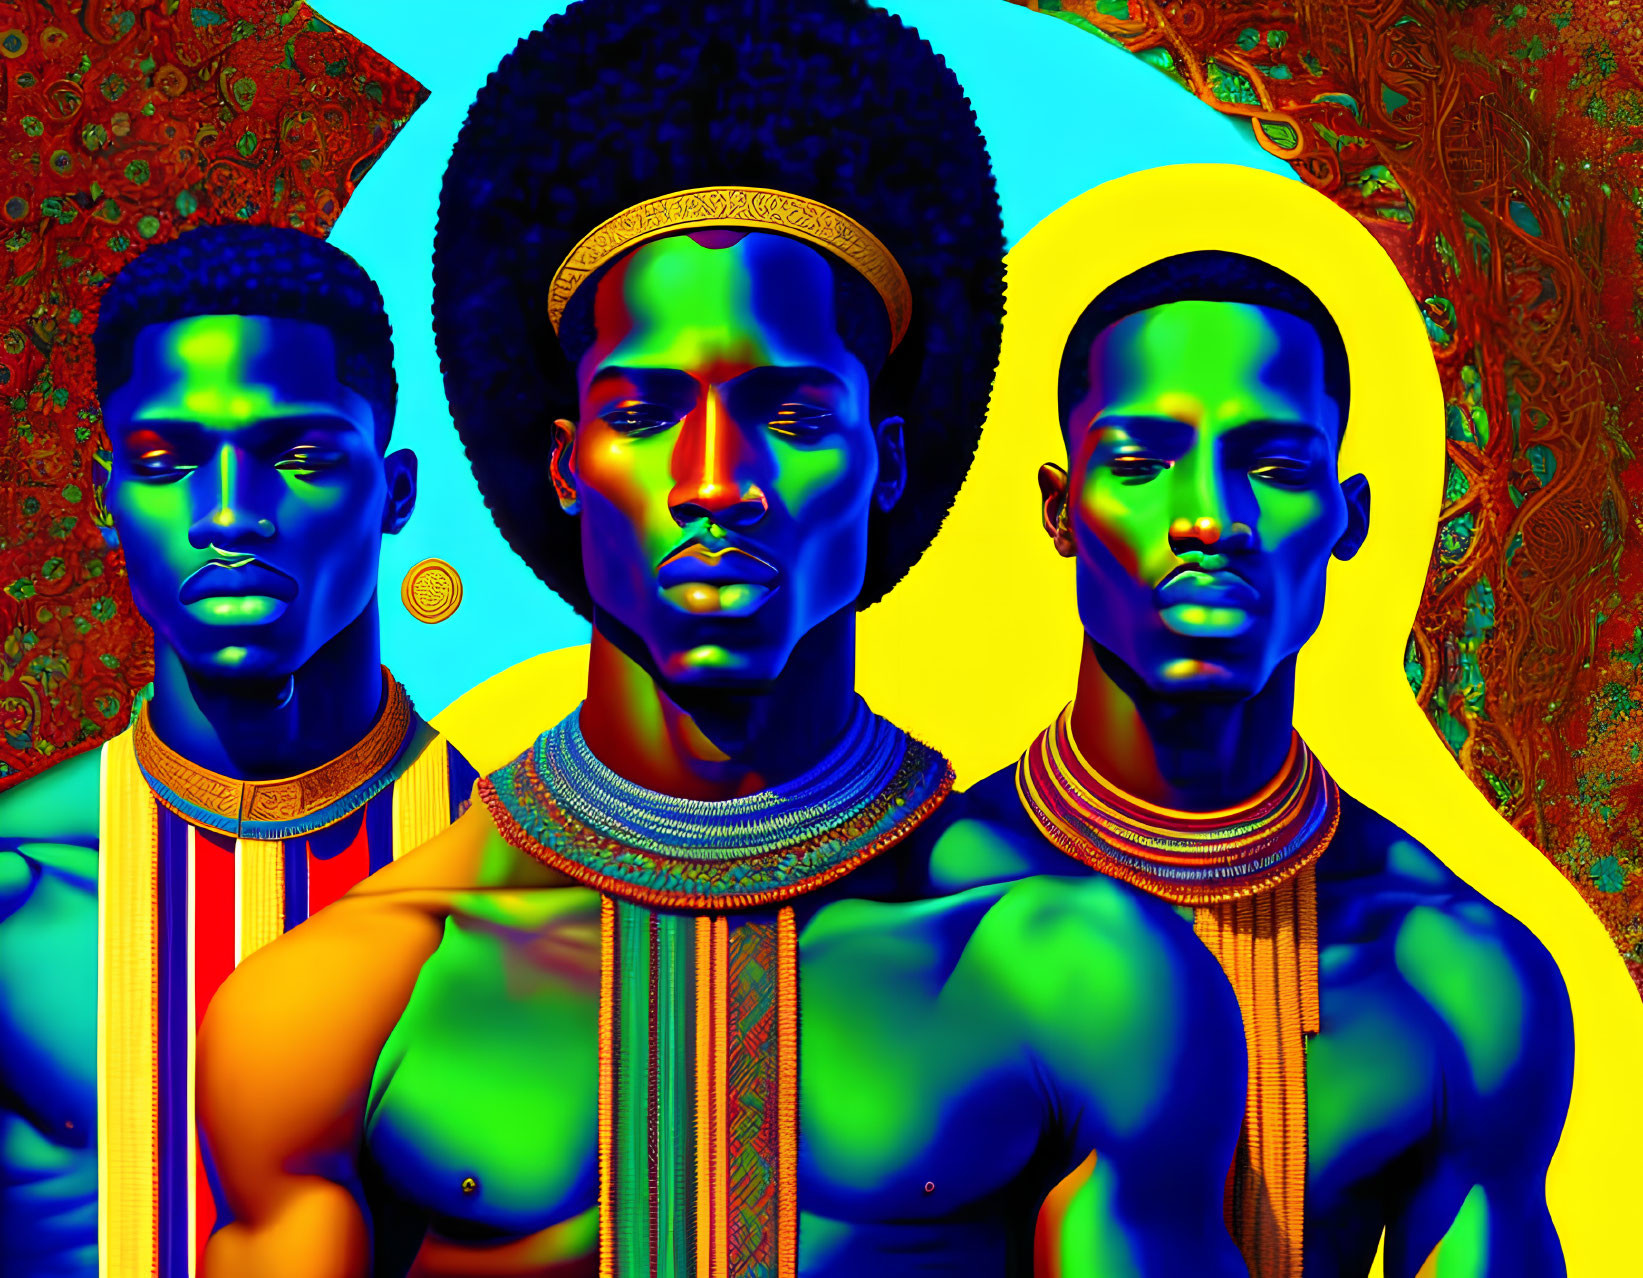 Colorful Psychedelic Male Figures with Afro Hairstyles and Tribal Necklaces